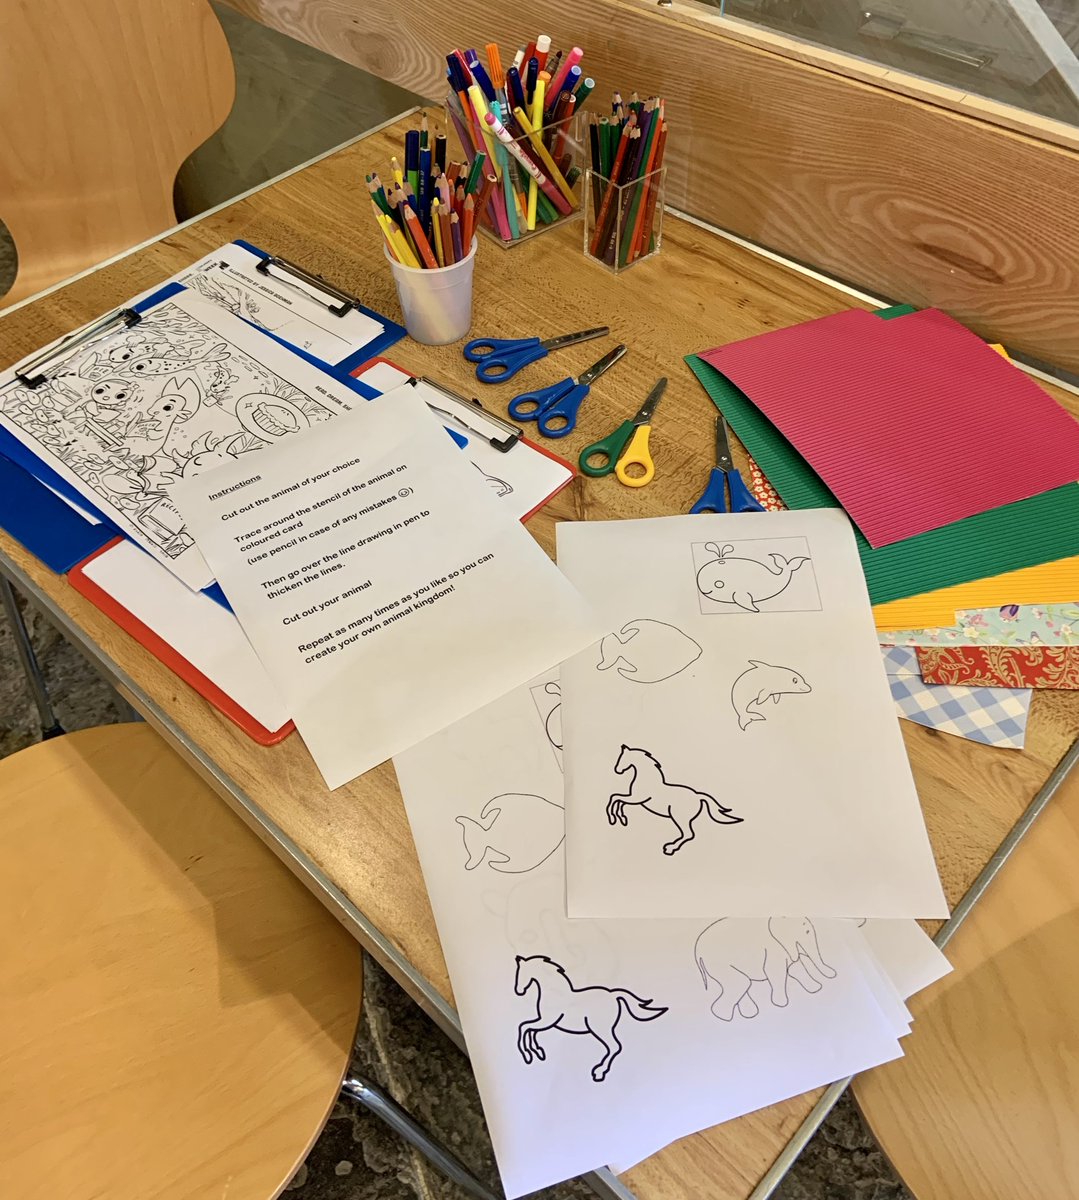 Get creative this #MayHalfTerm and have a go at making your very own animal kingdom at our activity table 🐳🐎🐘 

We can't wait to see everyone's creations! #HalfTerm #HalfTermActivities